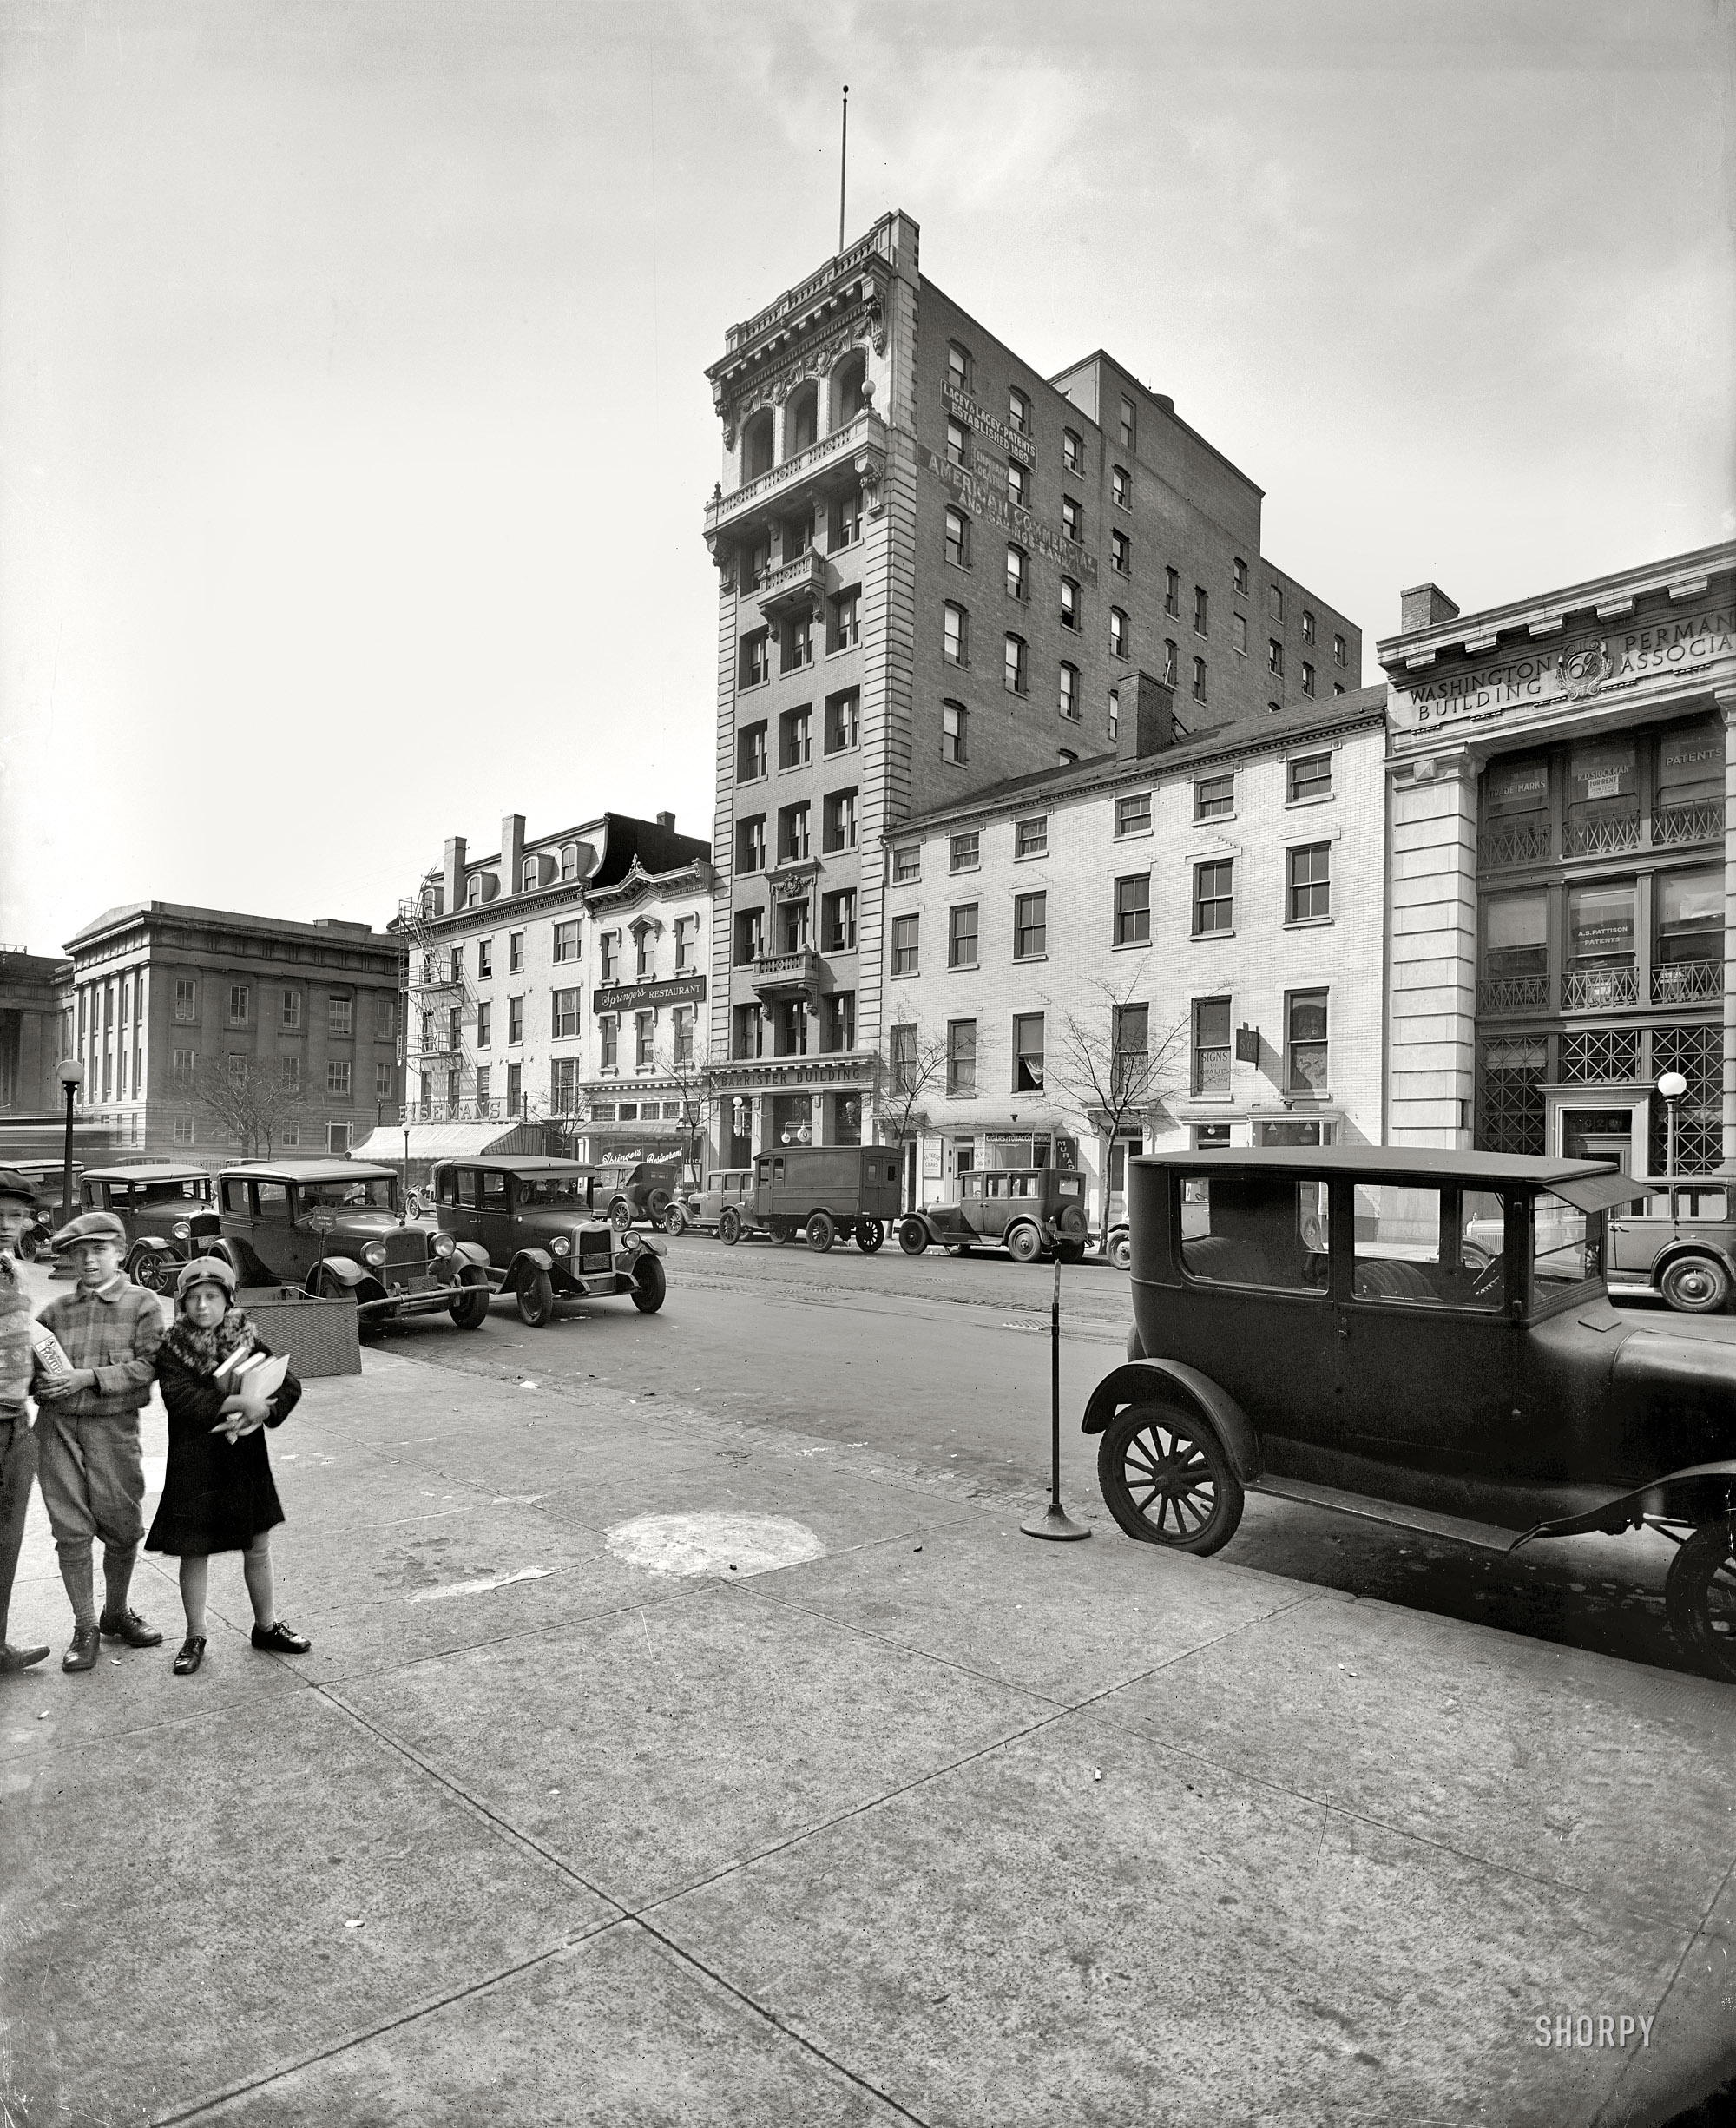 Washington, D.C., circa 1928. "Barrister Building, F Street N.W." National Photo Company Collection glass negative. View full size.